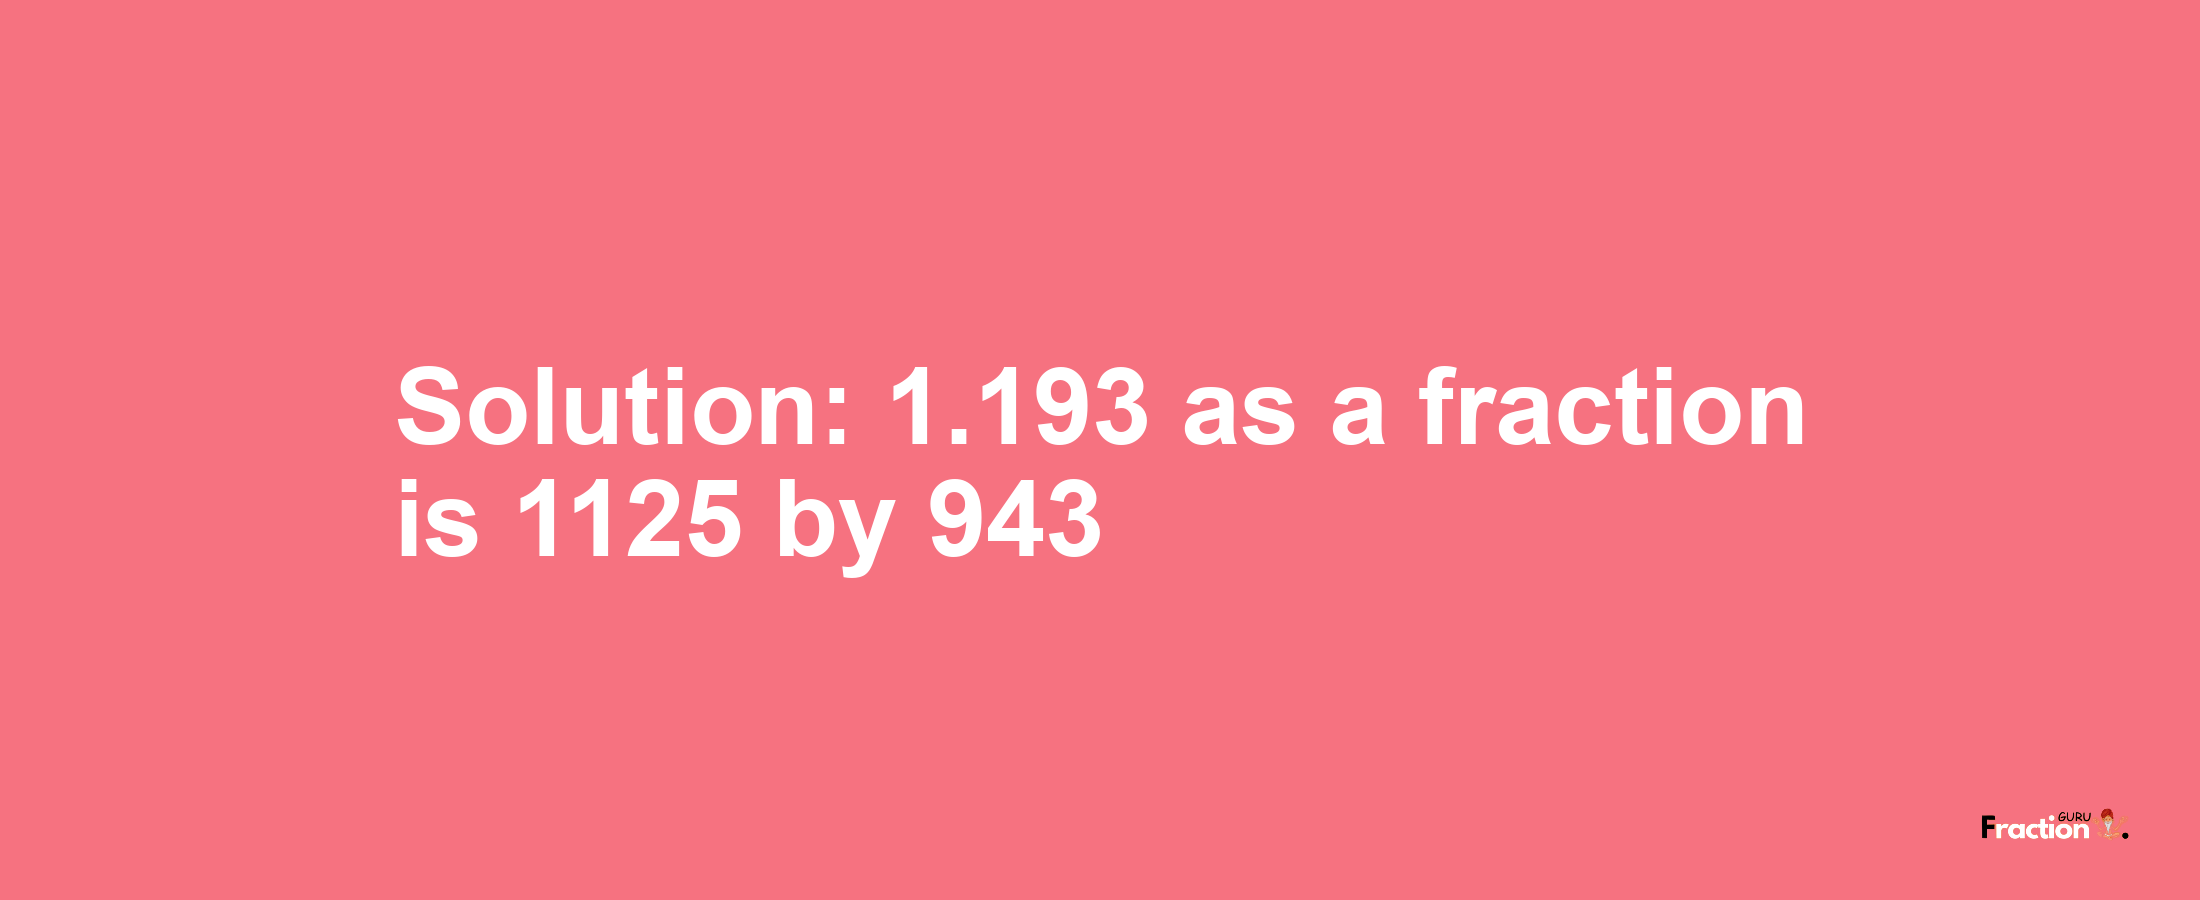 Solution:1.193 as a fraction is 1125/943